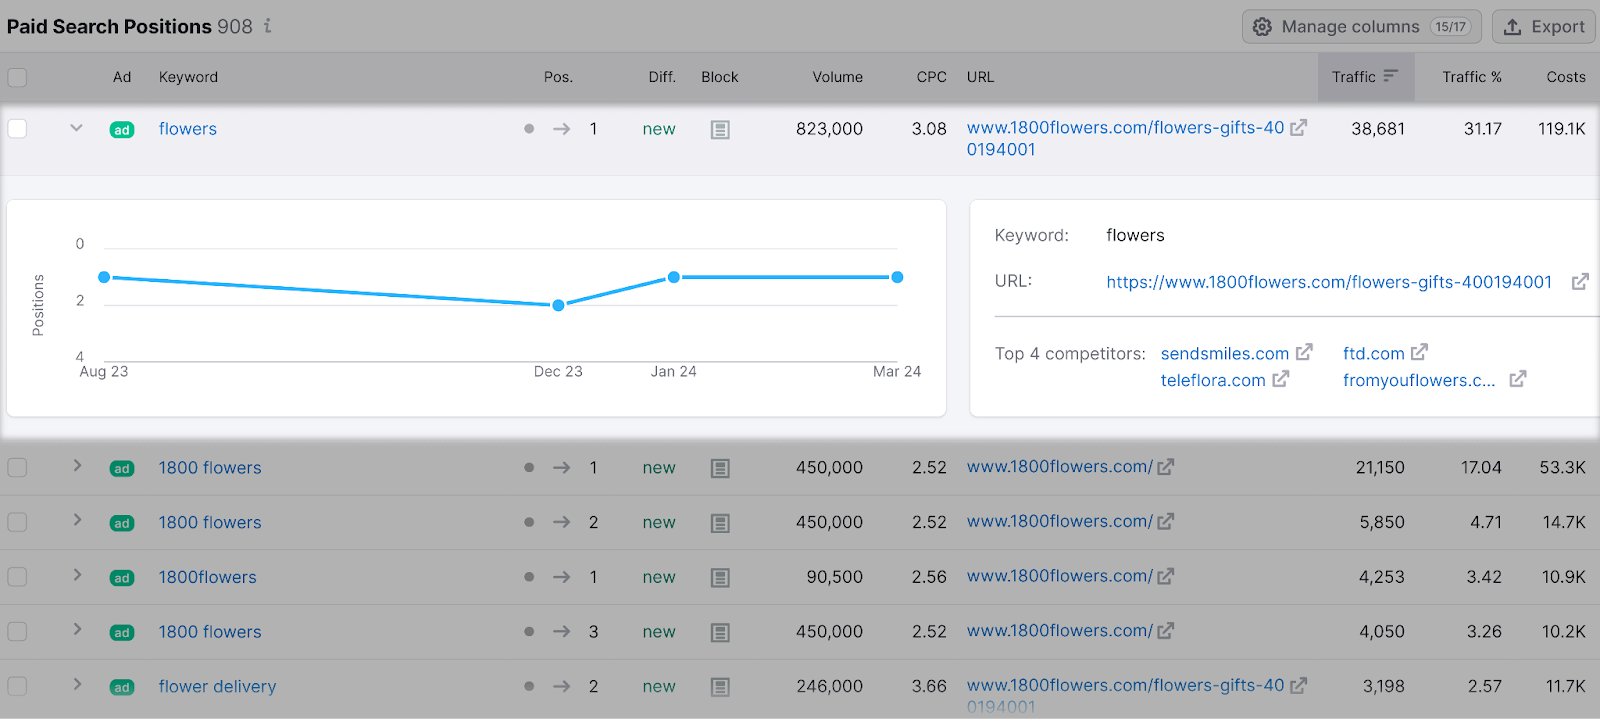 Search positions for the keyword "flowers" with a graph, data metrics, top 4 competitors, and website links.